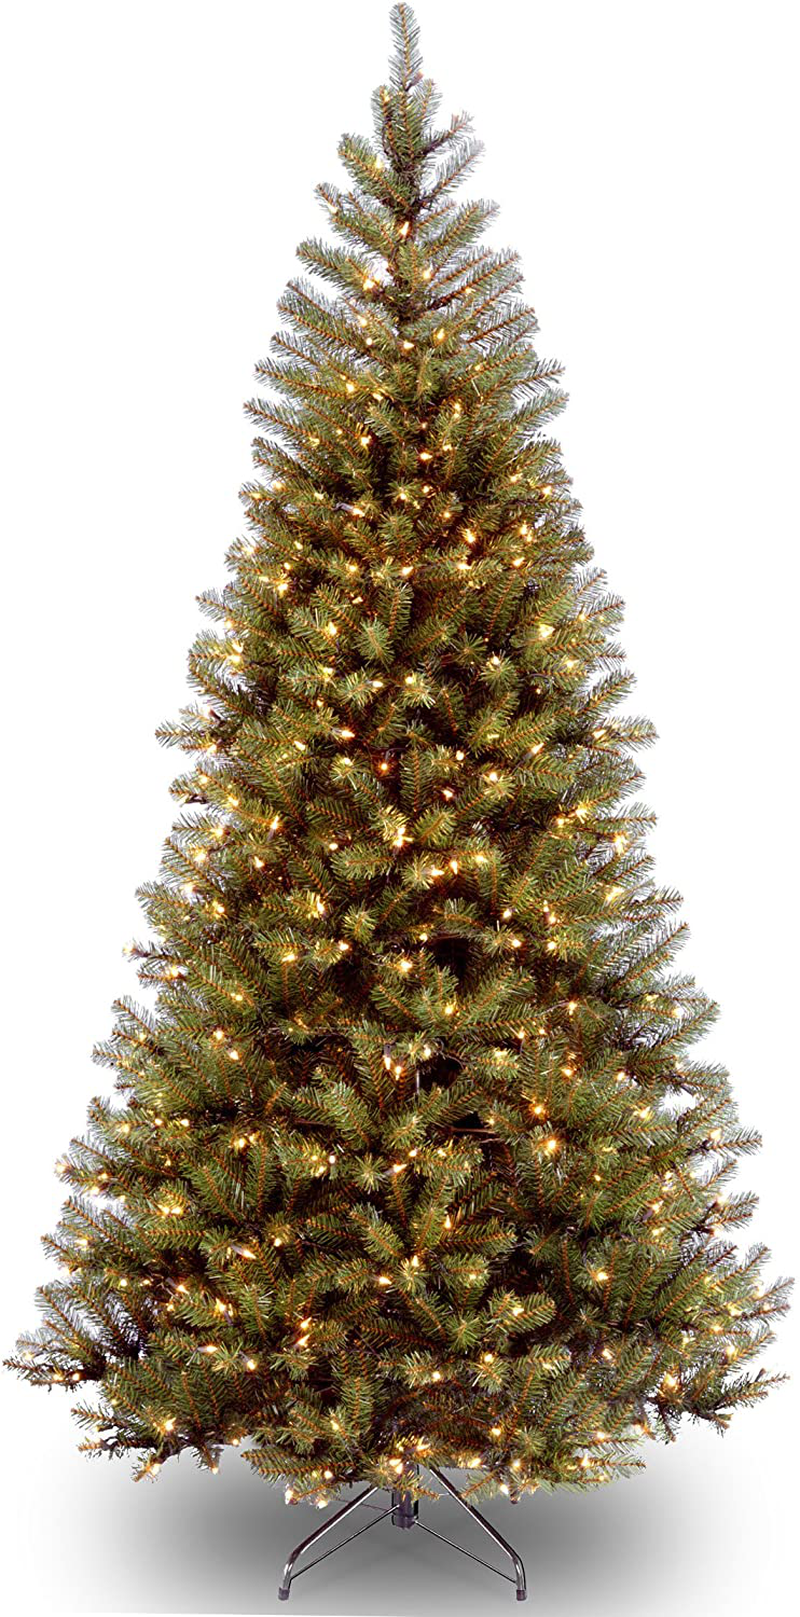 National Tree Company Pre-lit Artificial Christmas Tree | Includes Pre-strung White Lights and Stand | Aspen Spruce - 7 ft